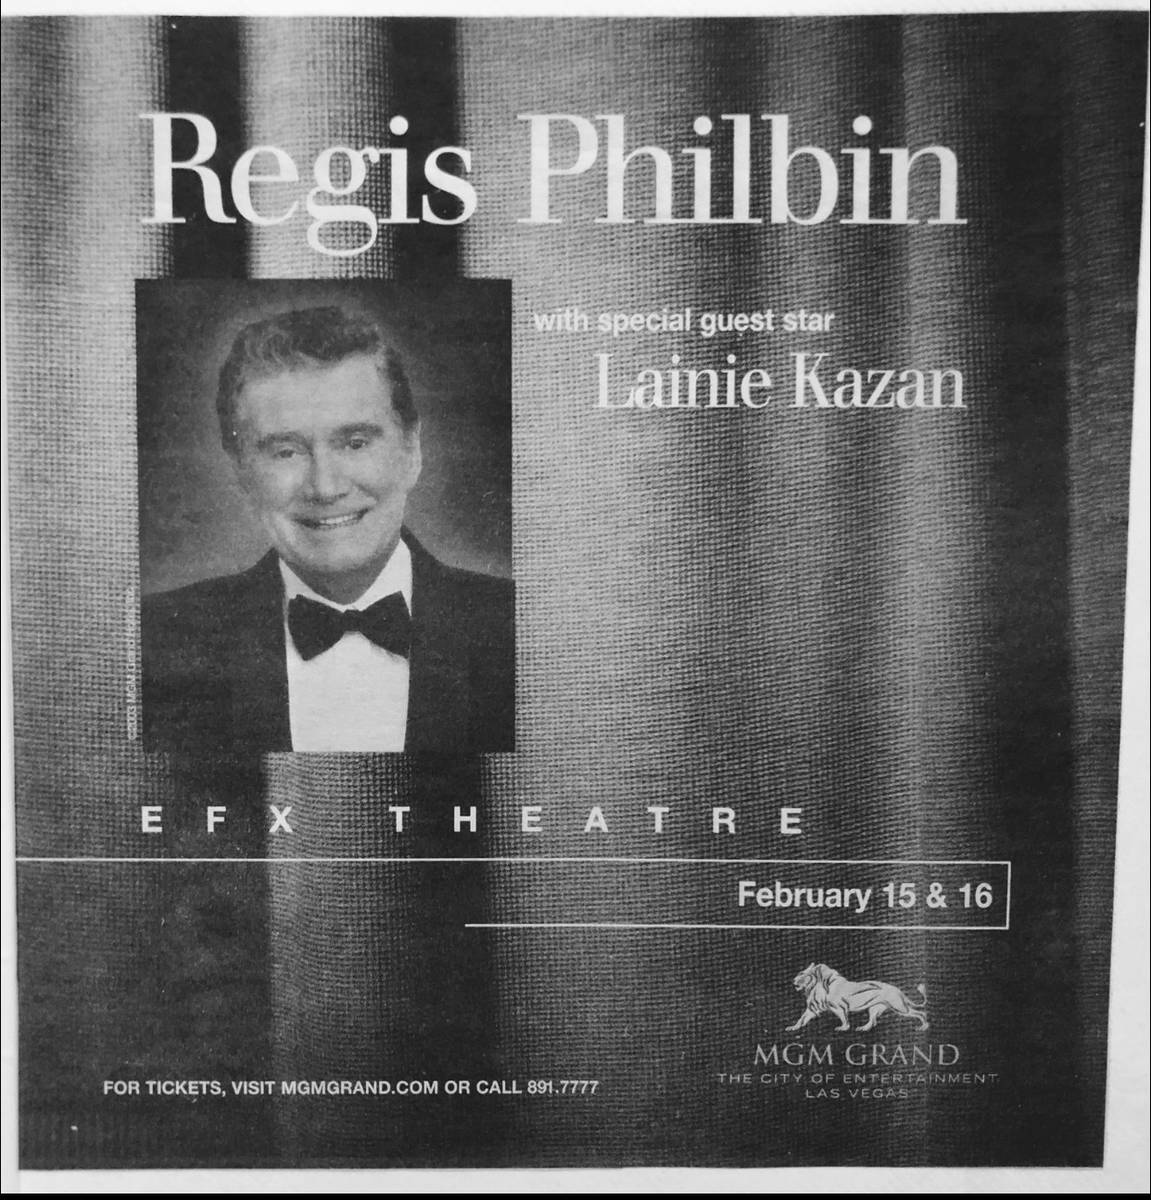 A promotional sign for Regis Philbin's show at MGM Grand in February 2004. (Glenn Alai)